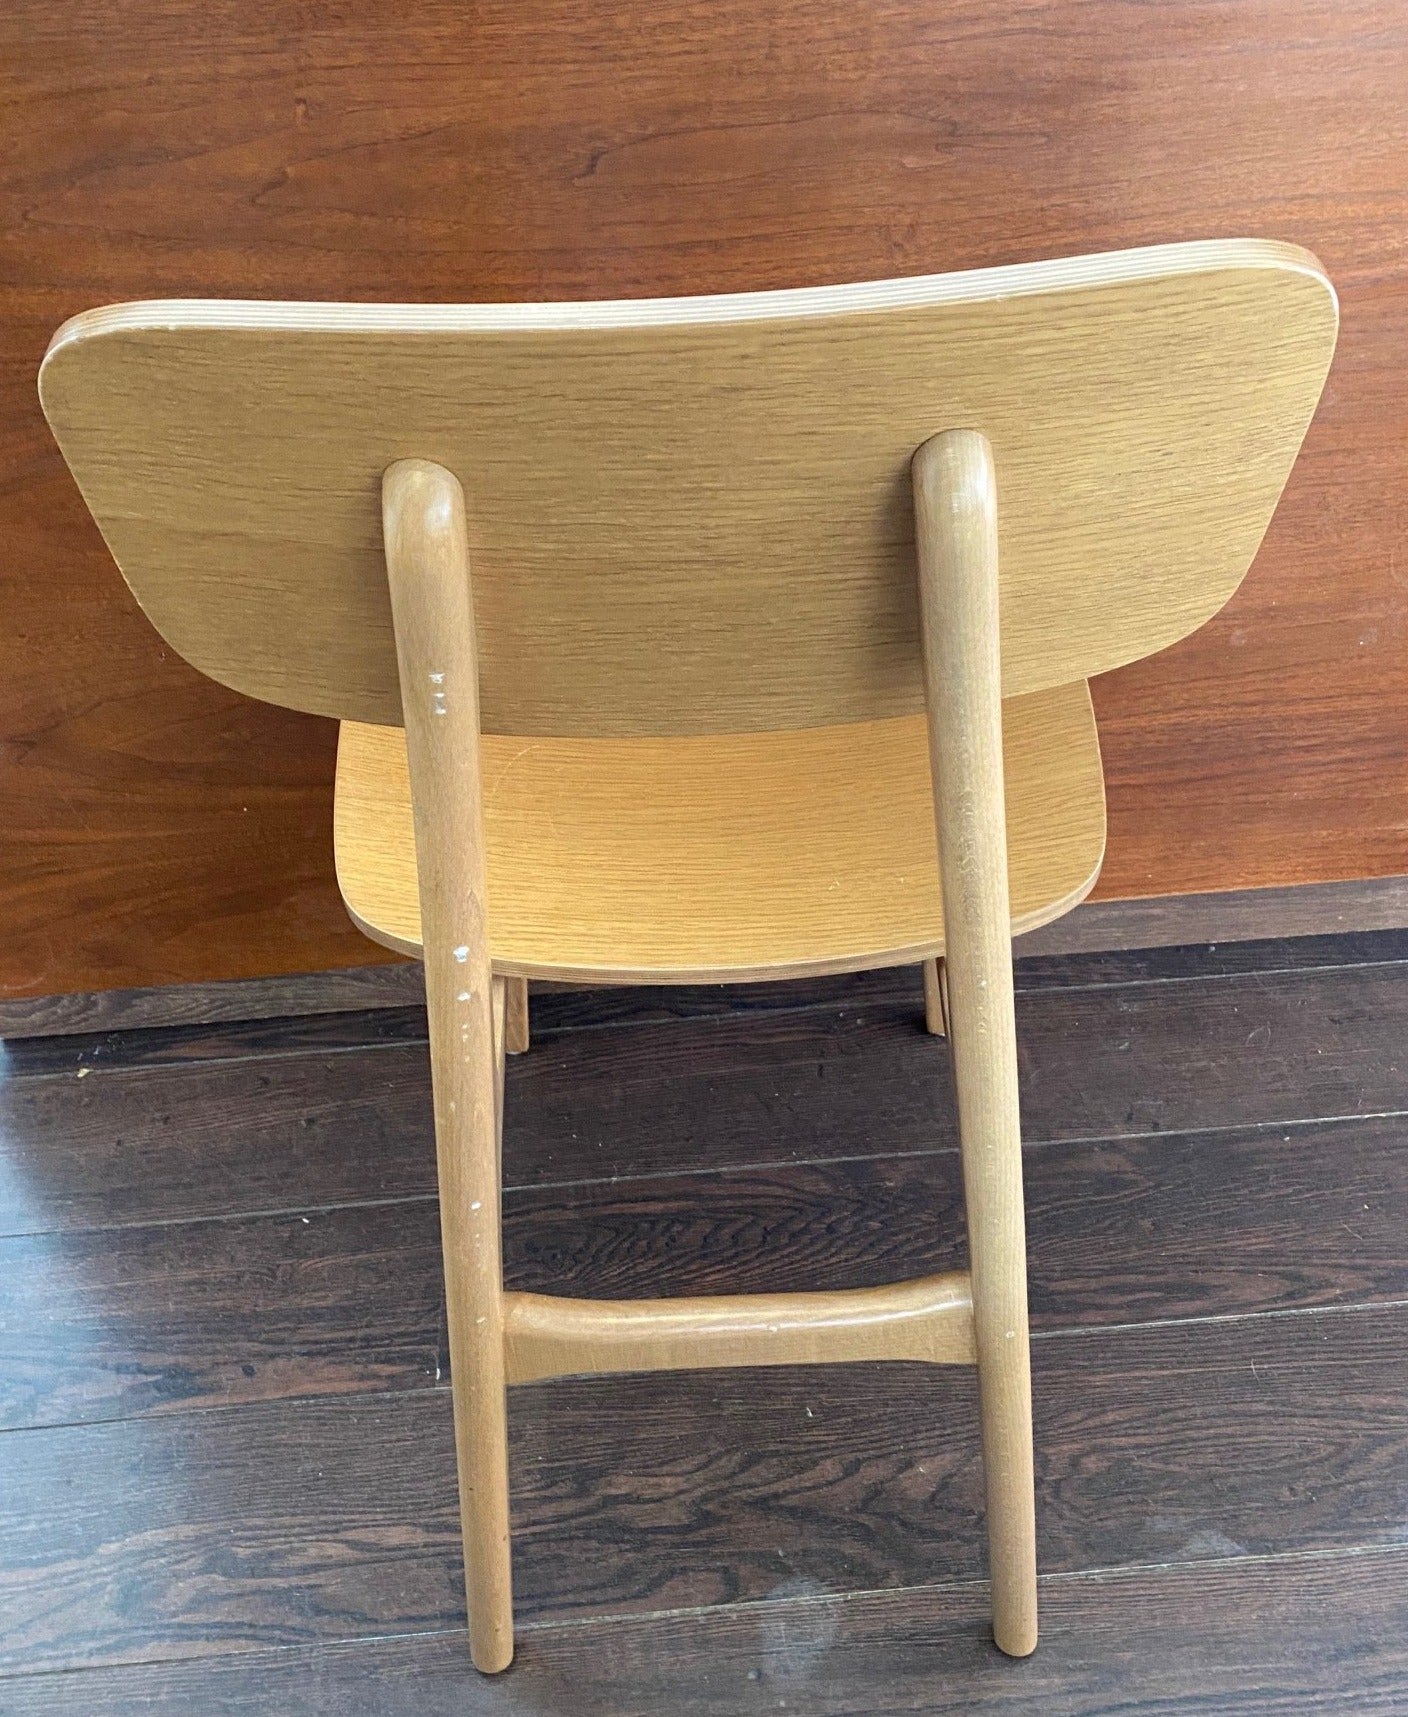 Beautiful mix of classic mid century with a contemporary design oak chair. Made in Italy. - Cook Street Vintage